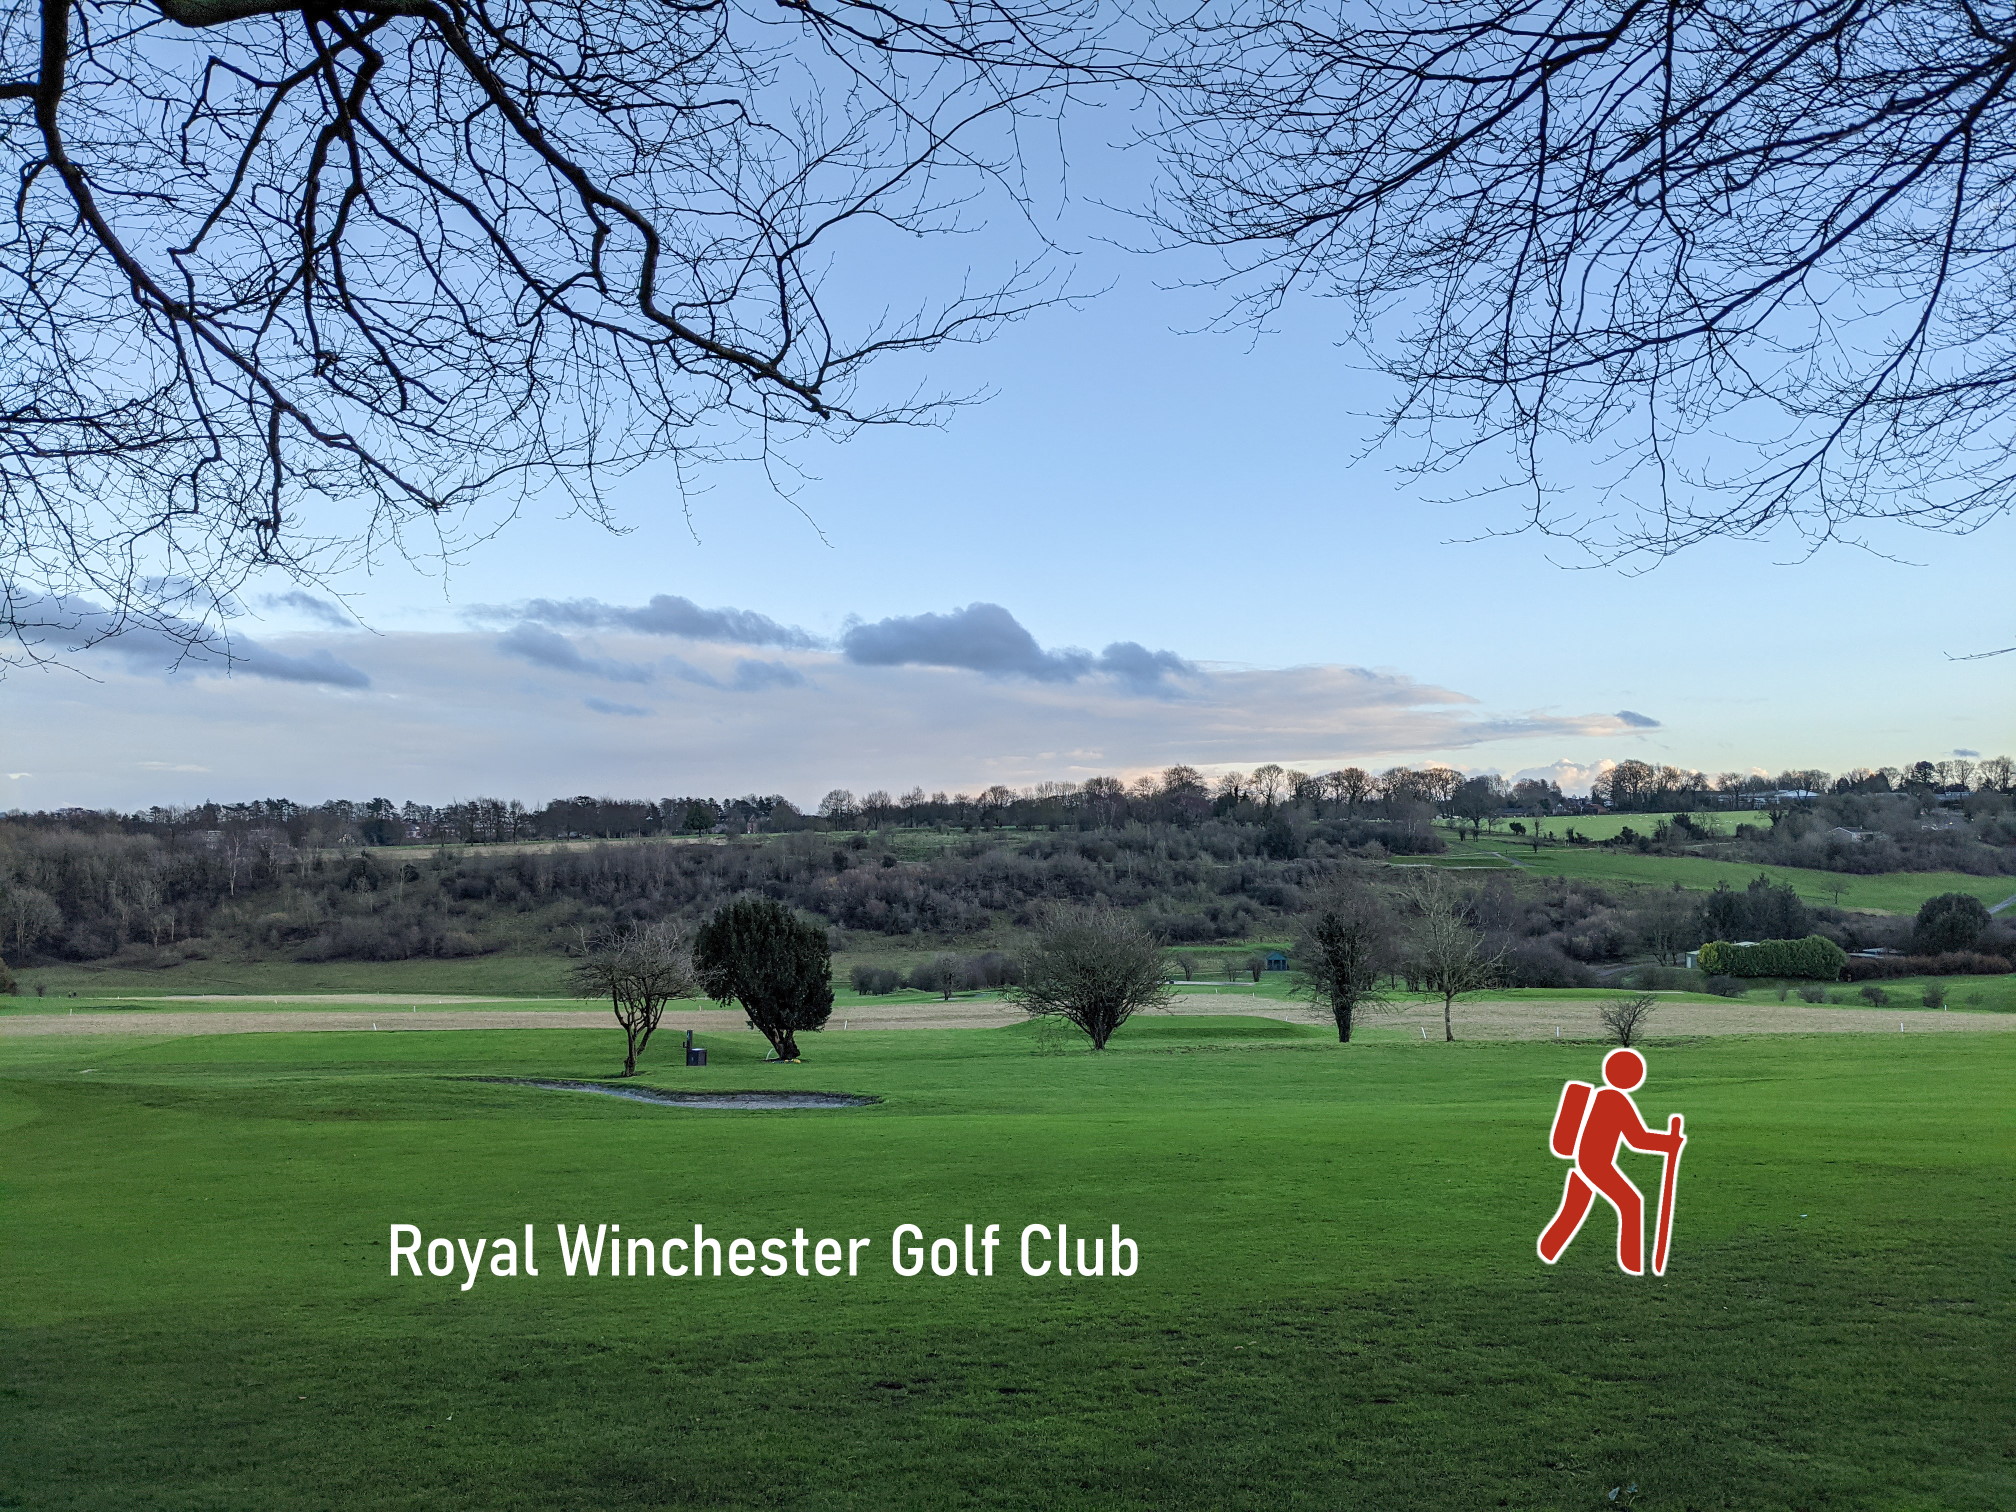 Royal Winchester Golf Club view